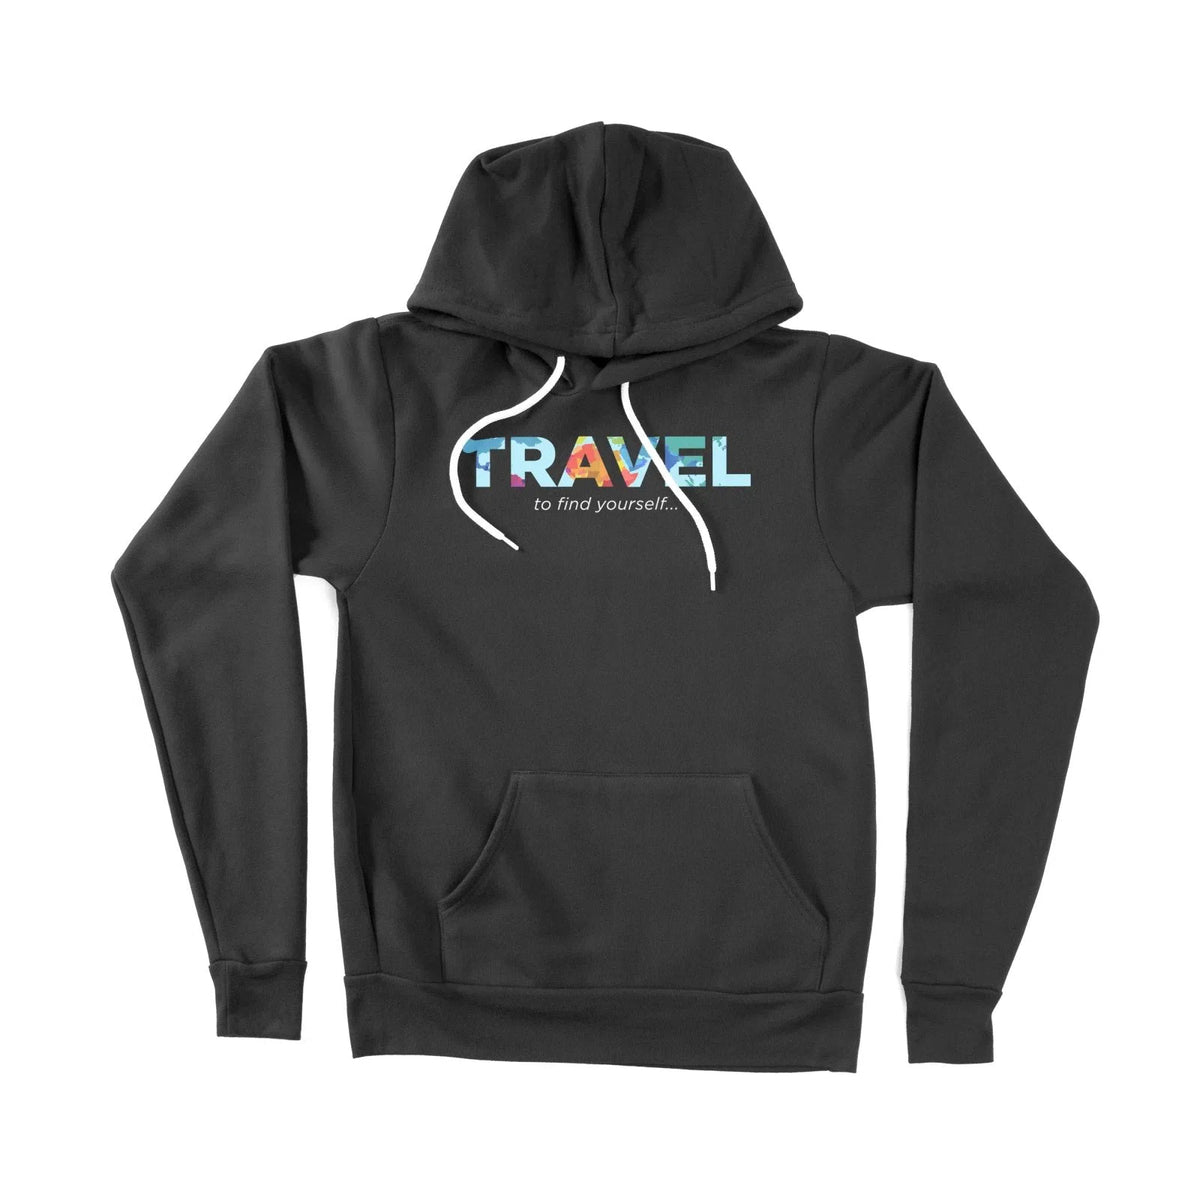 Travel, Find Yourself Unisex Adult Hoodie Chroma Clothing